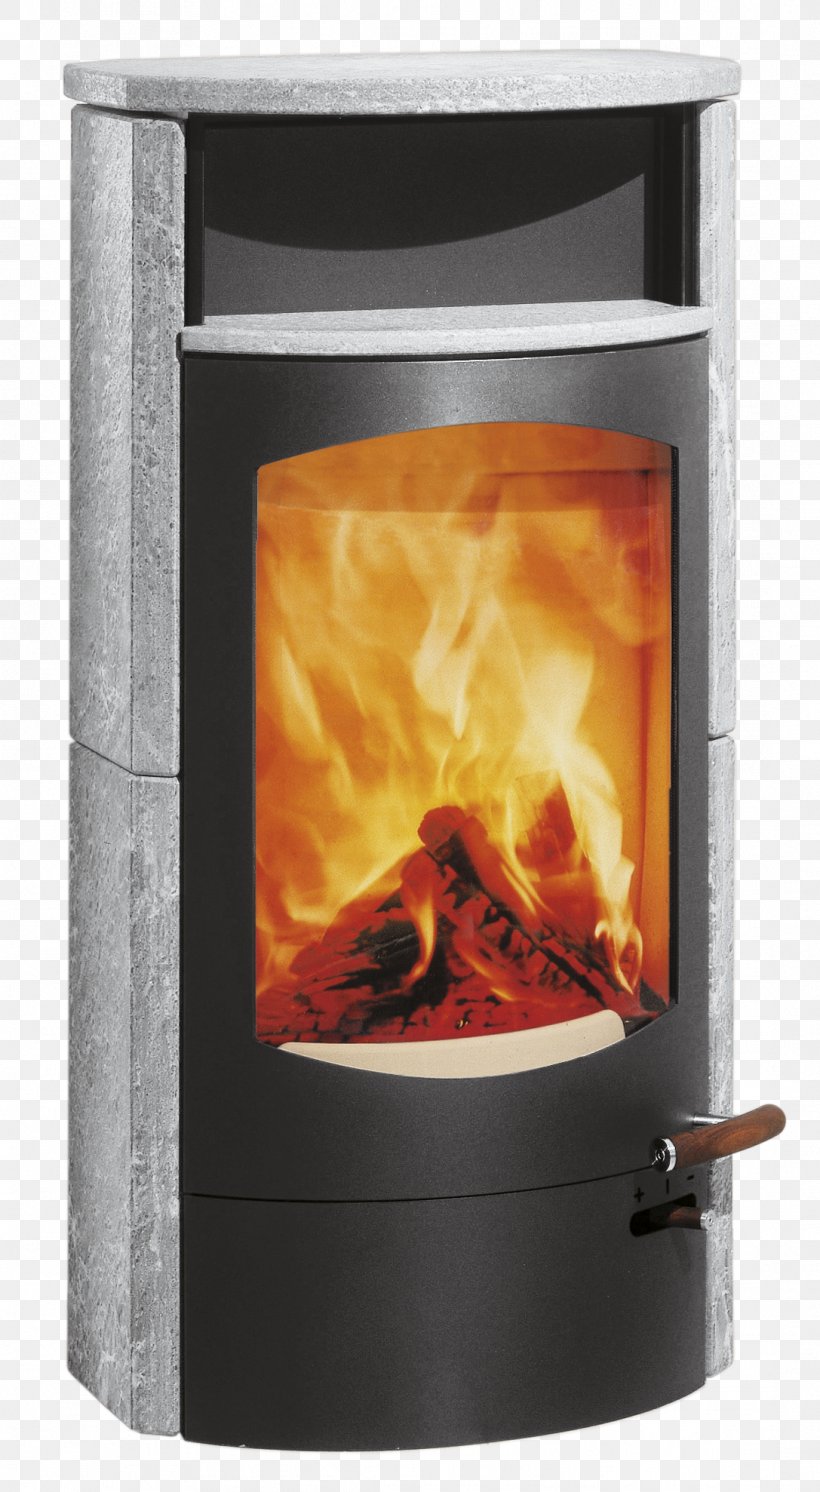 Wood Stoves Fireplace Kaminofen Kamin24, PNG, 1087x1978px, Wood Stoves, Austroflamm Gmbh, Chimney, Fire, Firebox Download Free